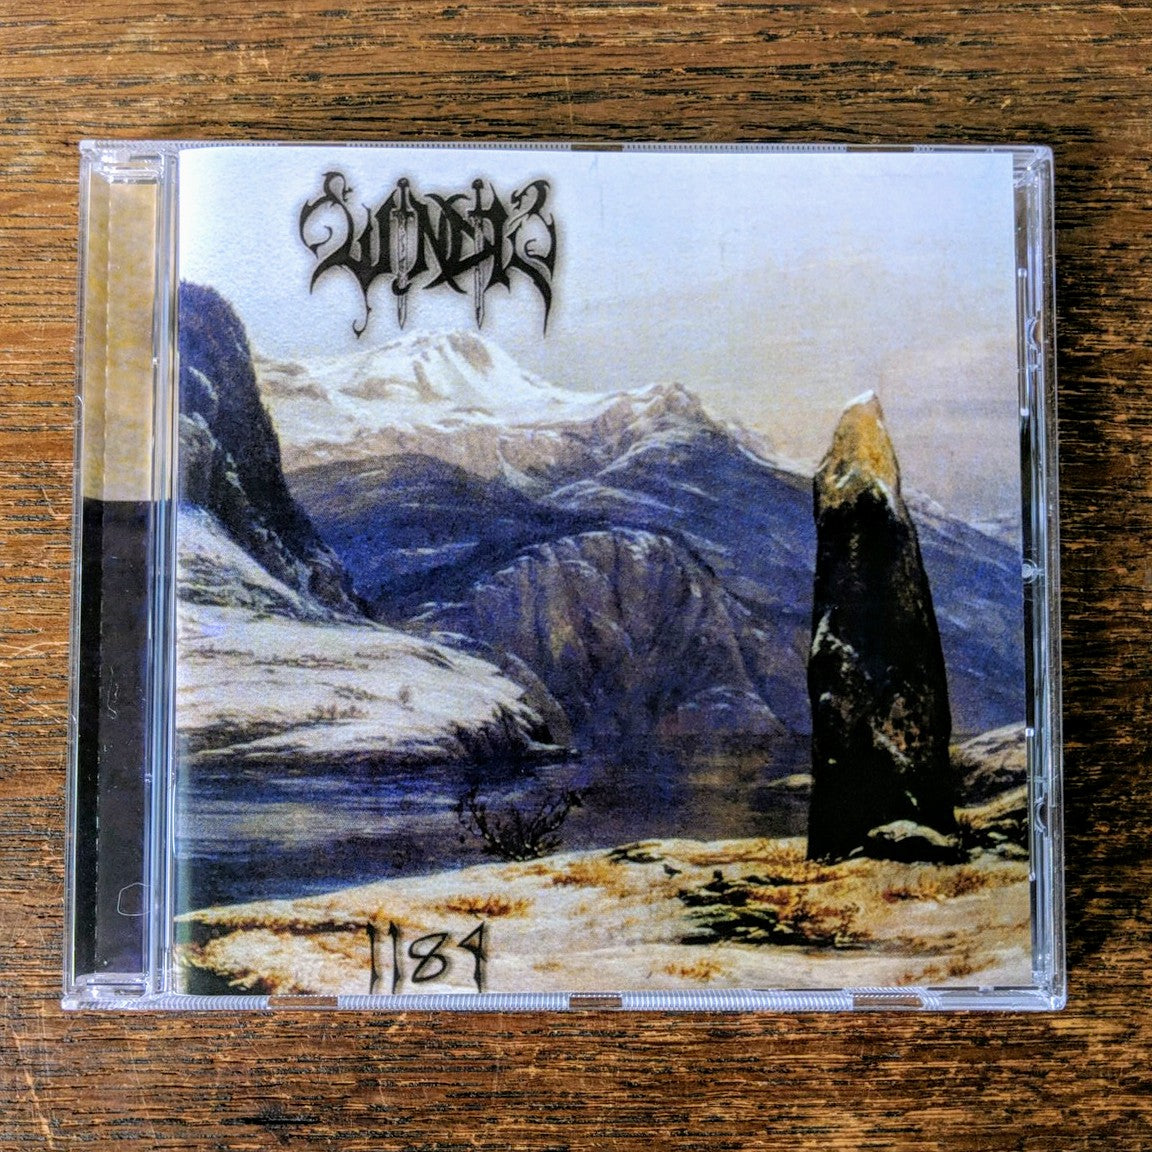 [SOLD OUT] WINDIR "1184" CD